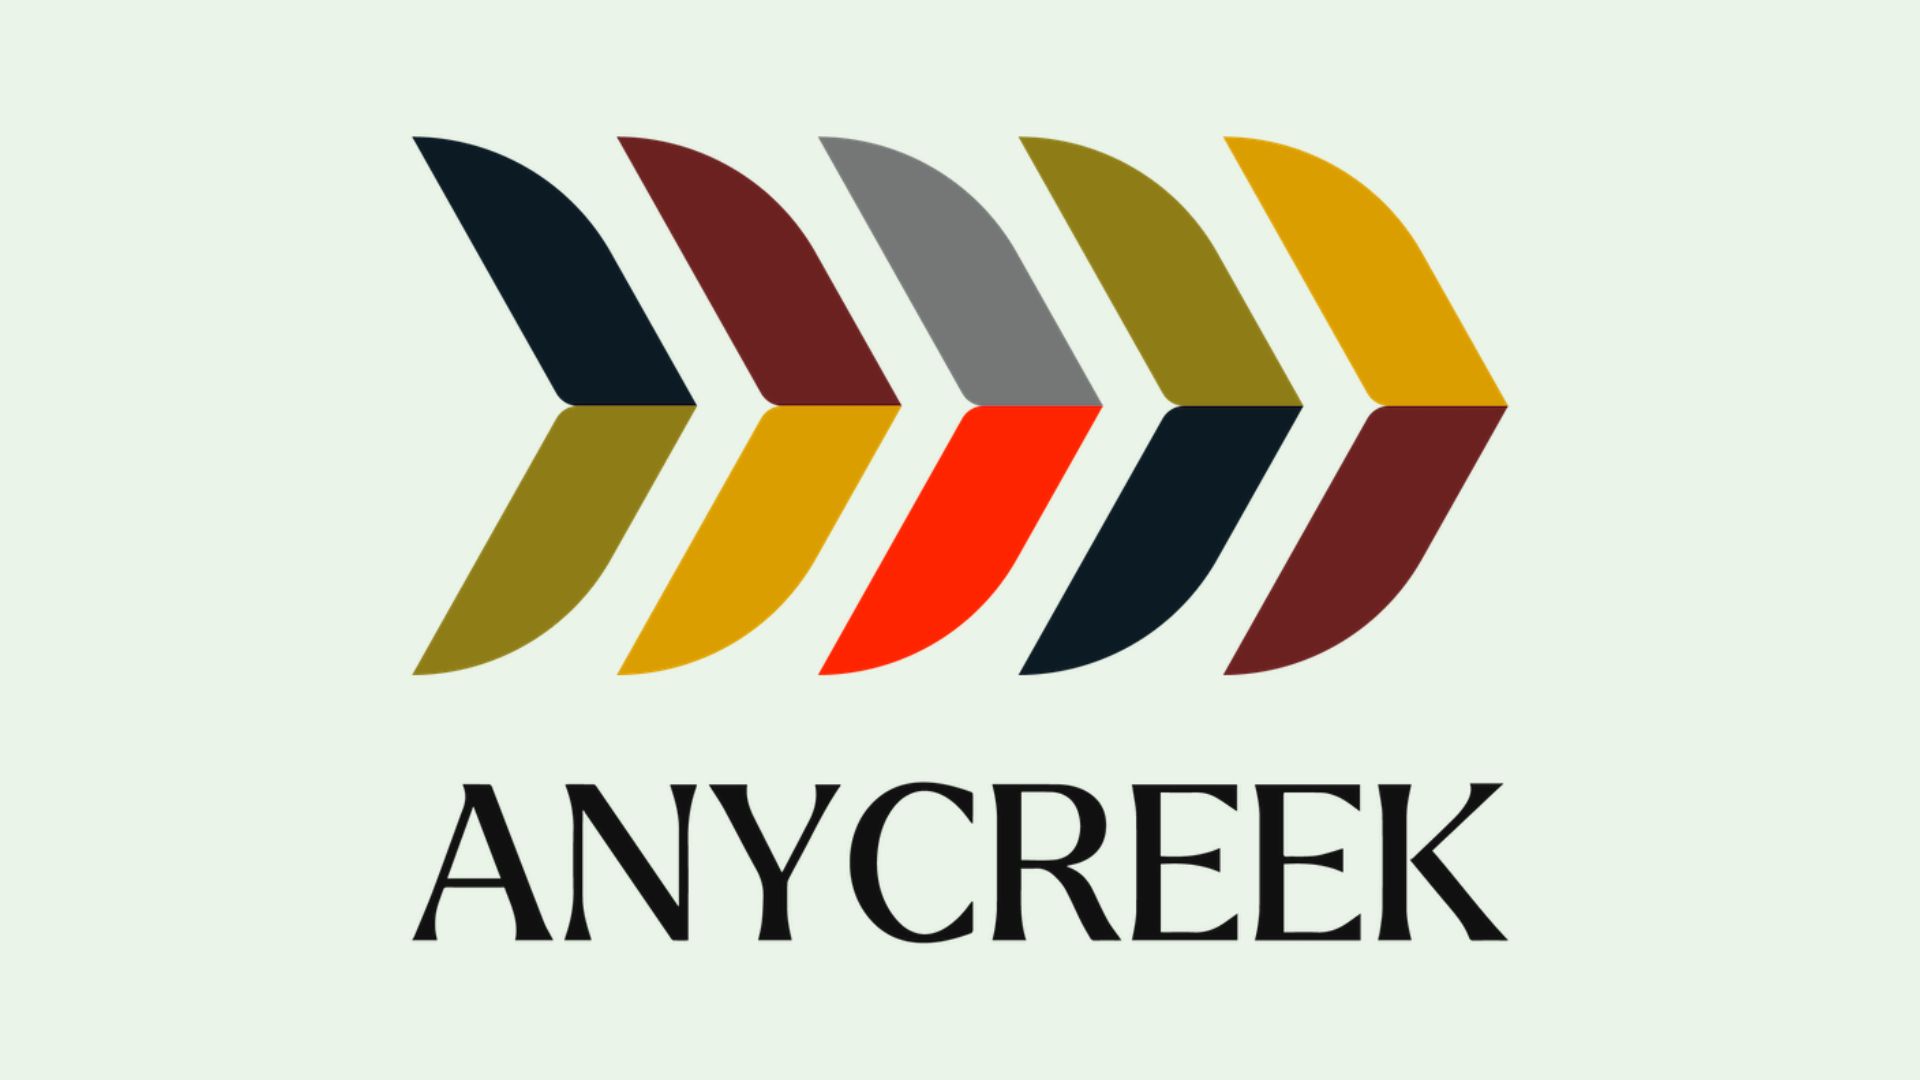 AnyCreek Secures $1.8 Million in Seed Funding